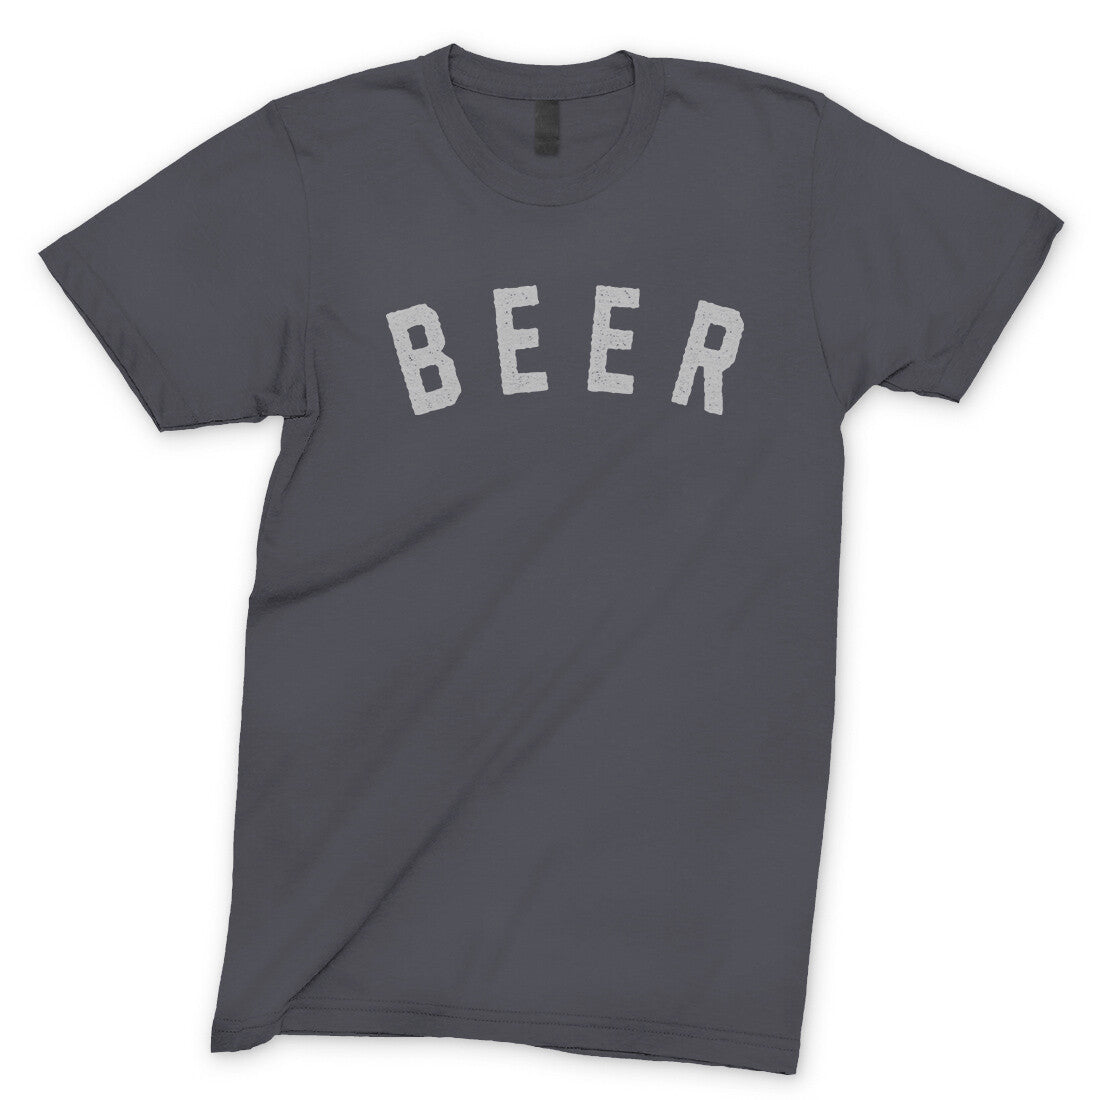 Beer in Charcoal Color